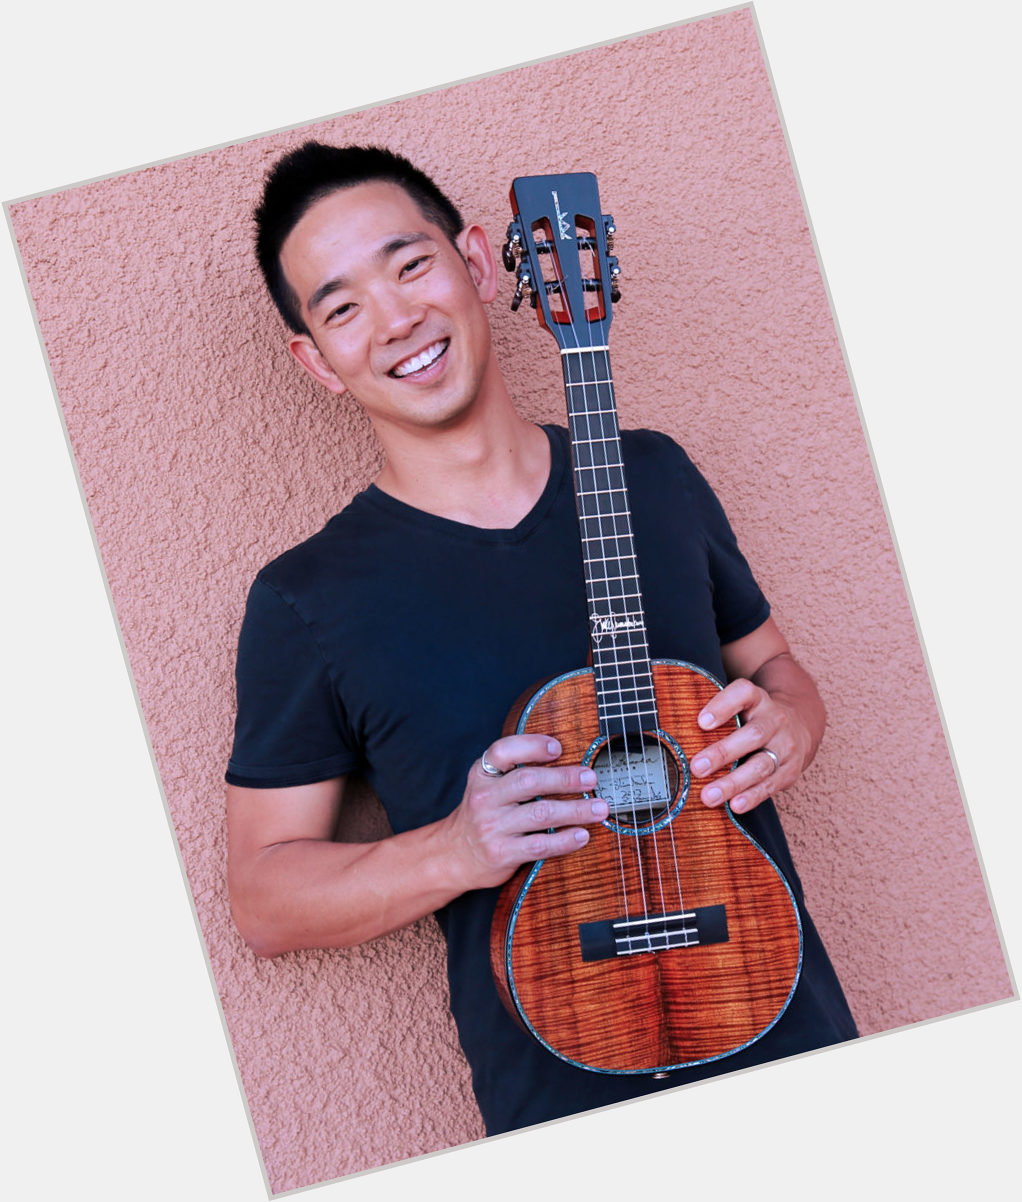 Please join me here at in wishing Jake Shimabukuro (Ukulist) a very happy 46th Birthday today  